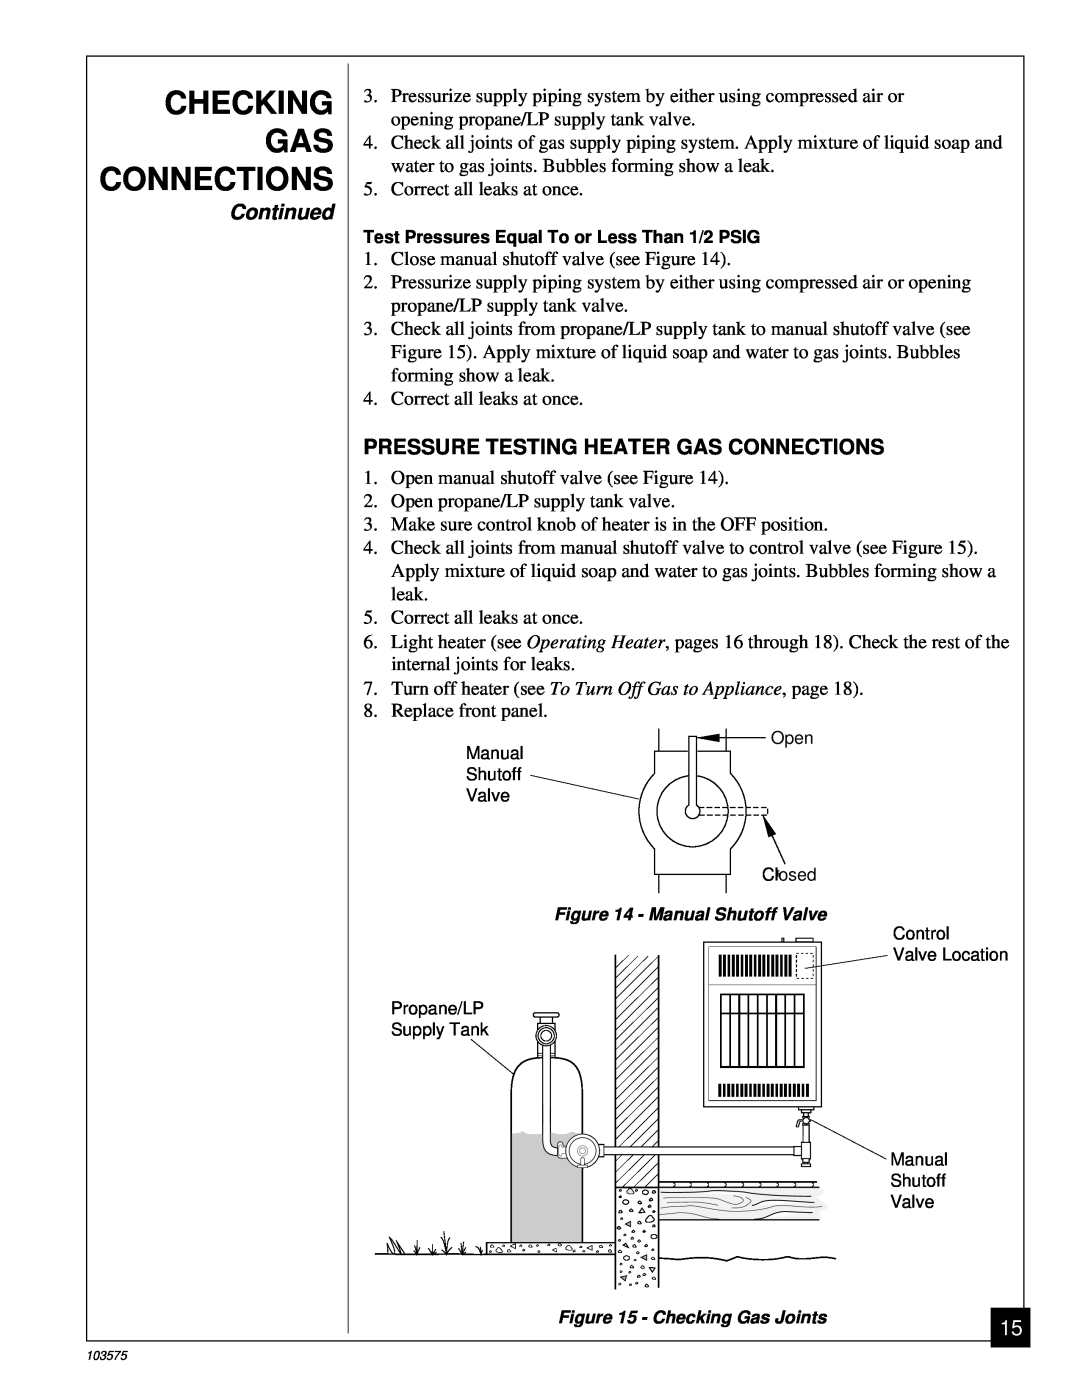 Desa CGP10TL installation manual Checking Gas Connections, Continued, Pressure Testing Heater Gas Connections 